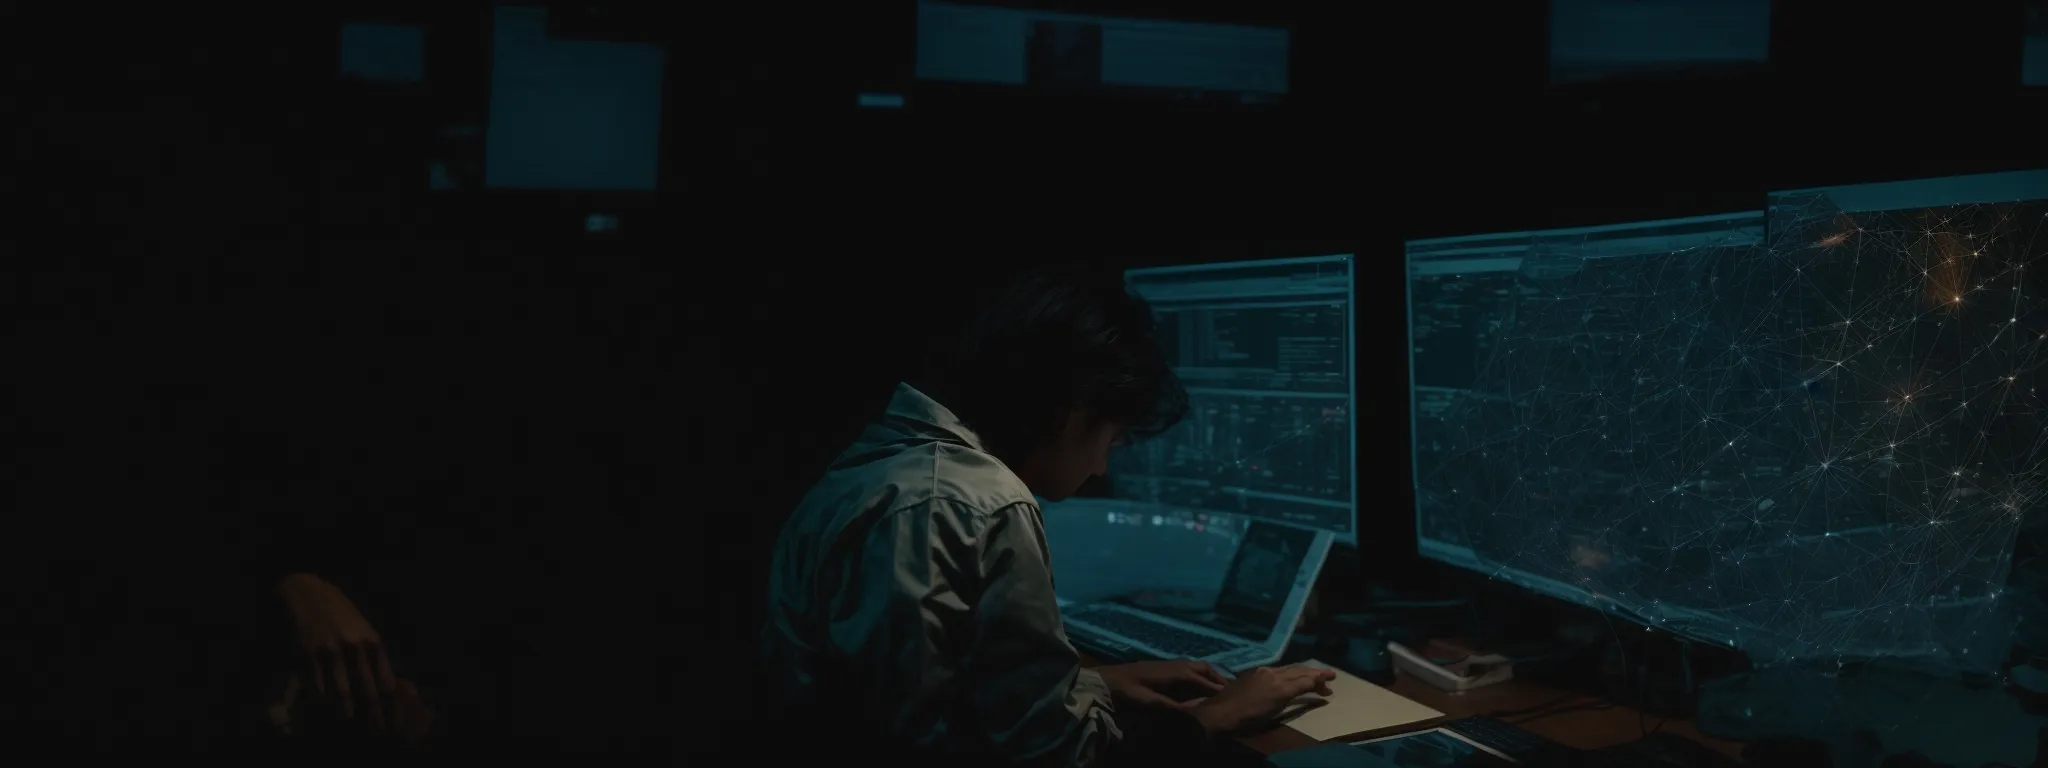 a person sits at a desk, intently studying an intricate web of connected nodes on a computer screen.